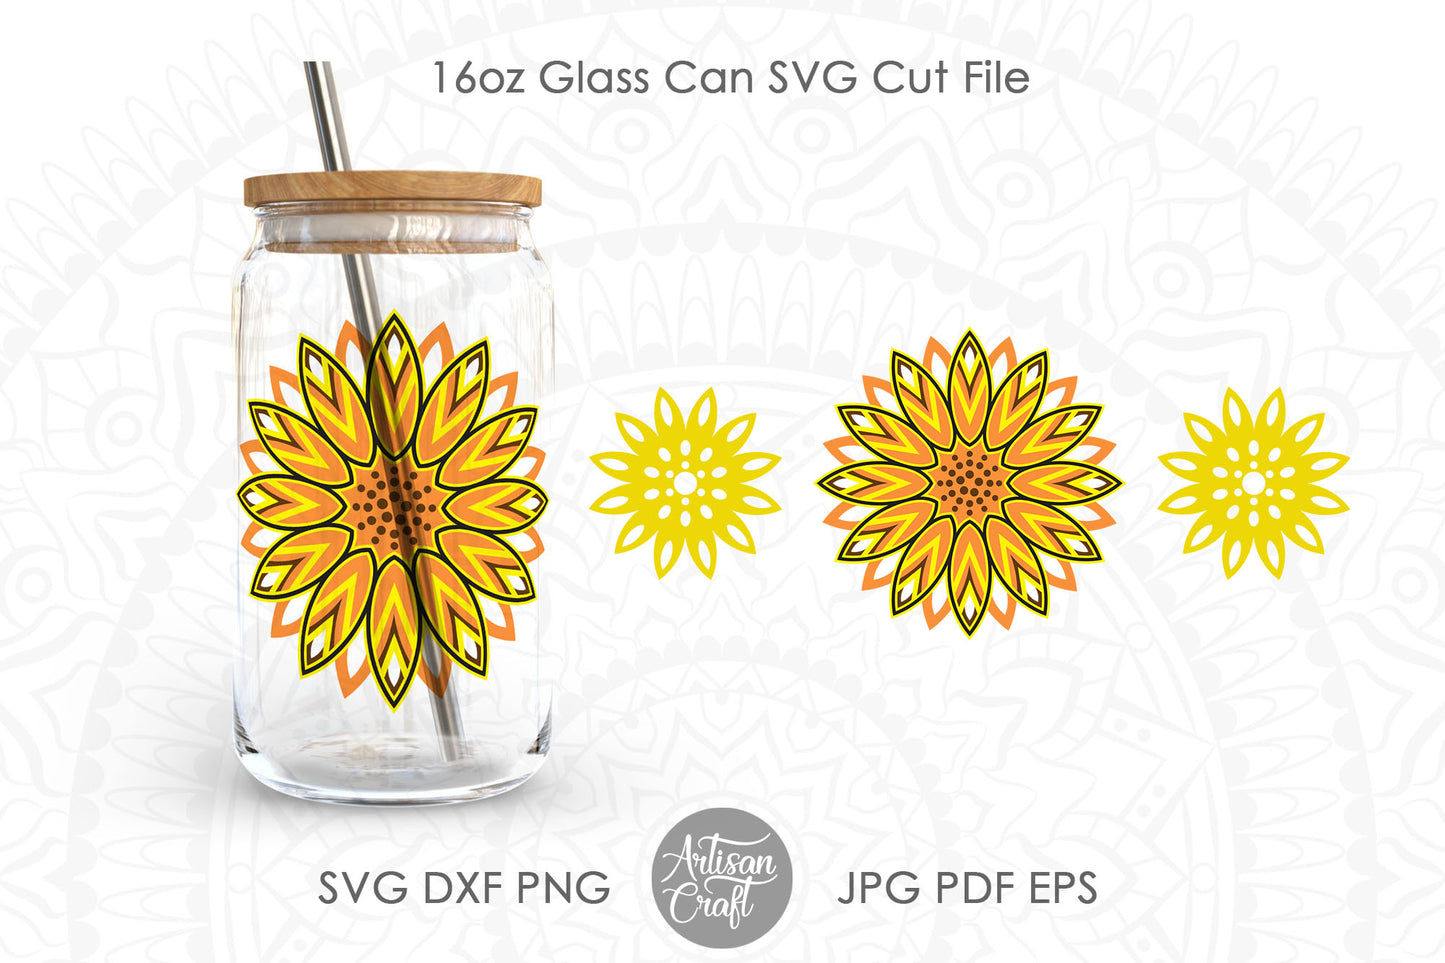 Sunflower 16oz can glass SVG with monograms